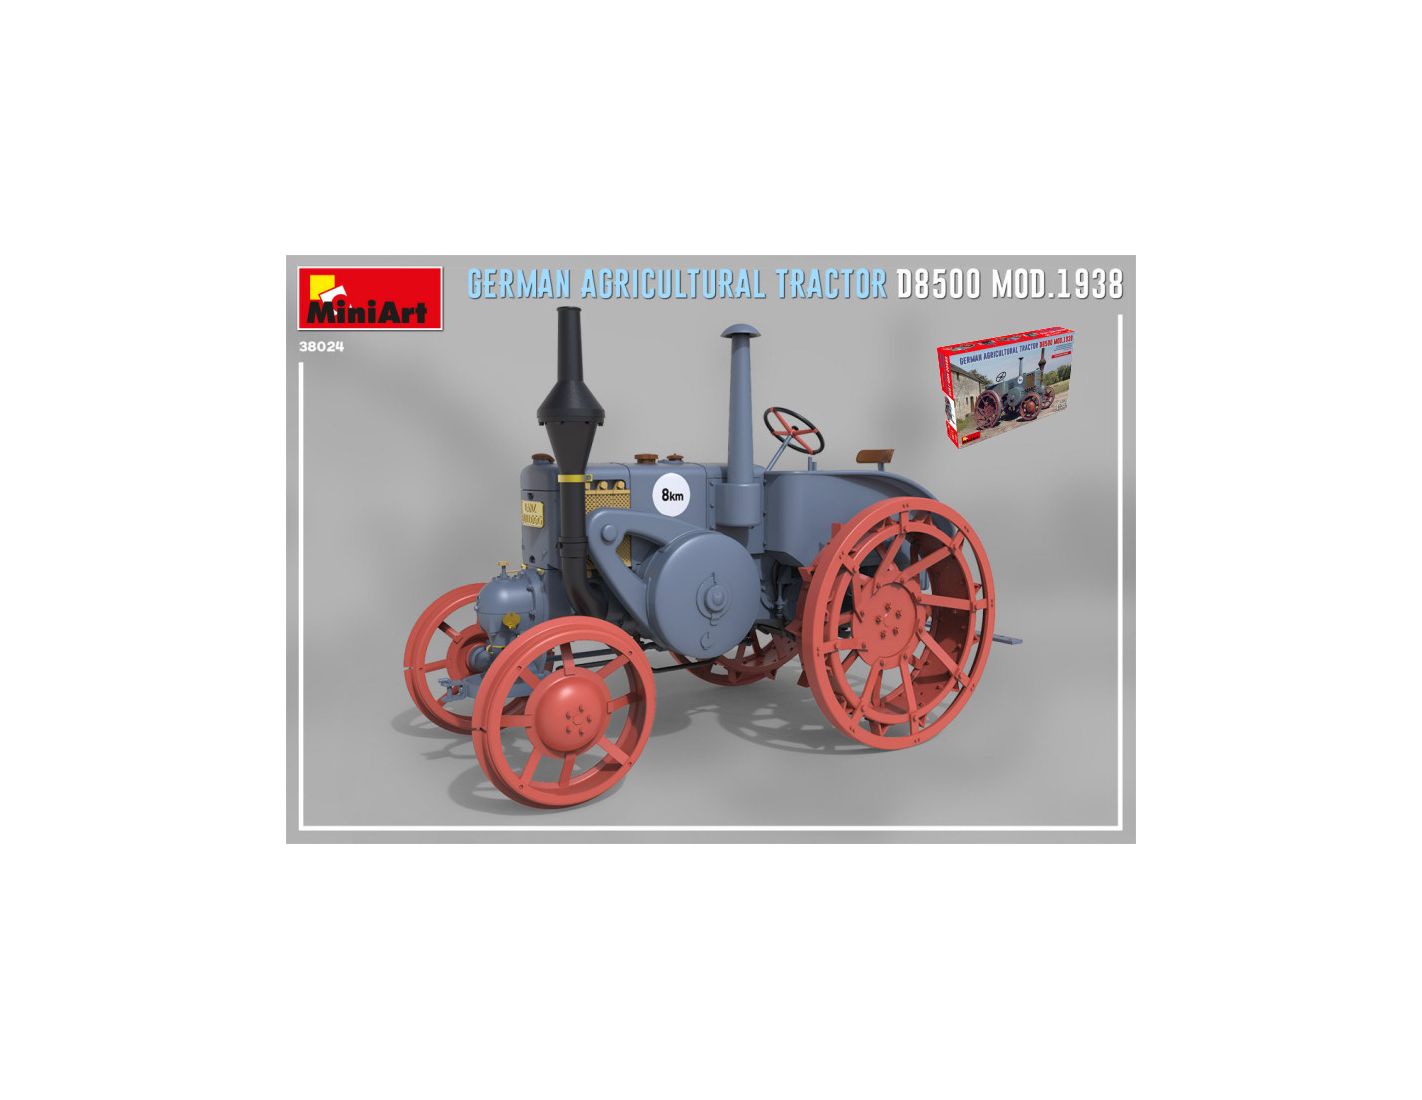 Miniart 1:35 German D8500 Mod 1938 Agricultural Tractor MIN38024 